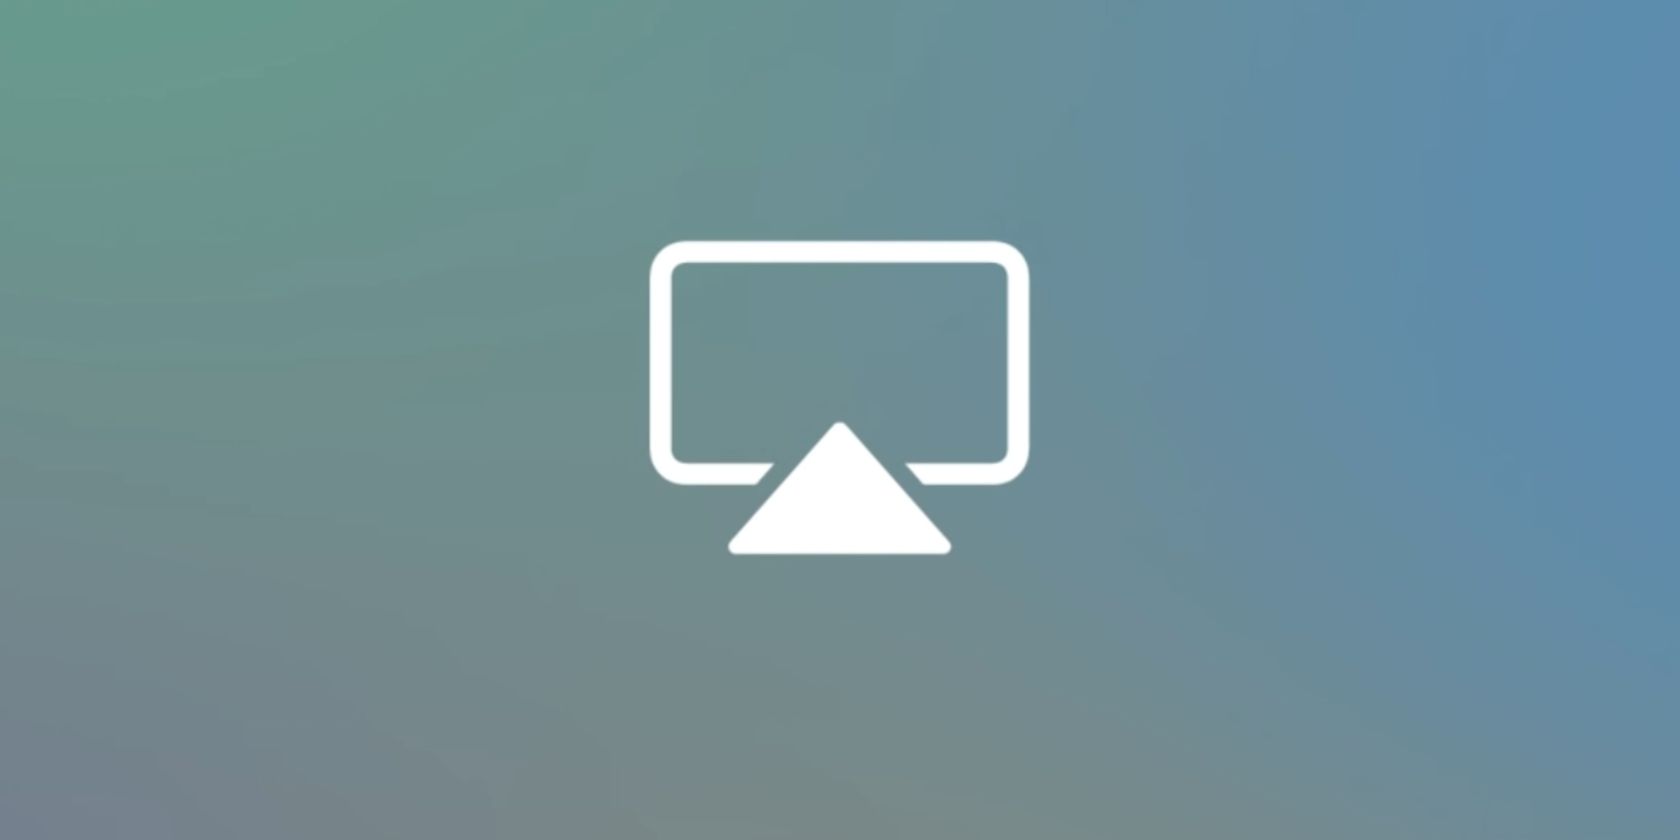 An AirPlay icon set against a subdued gradient background